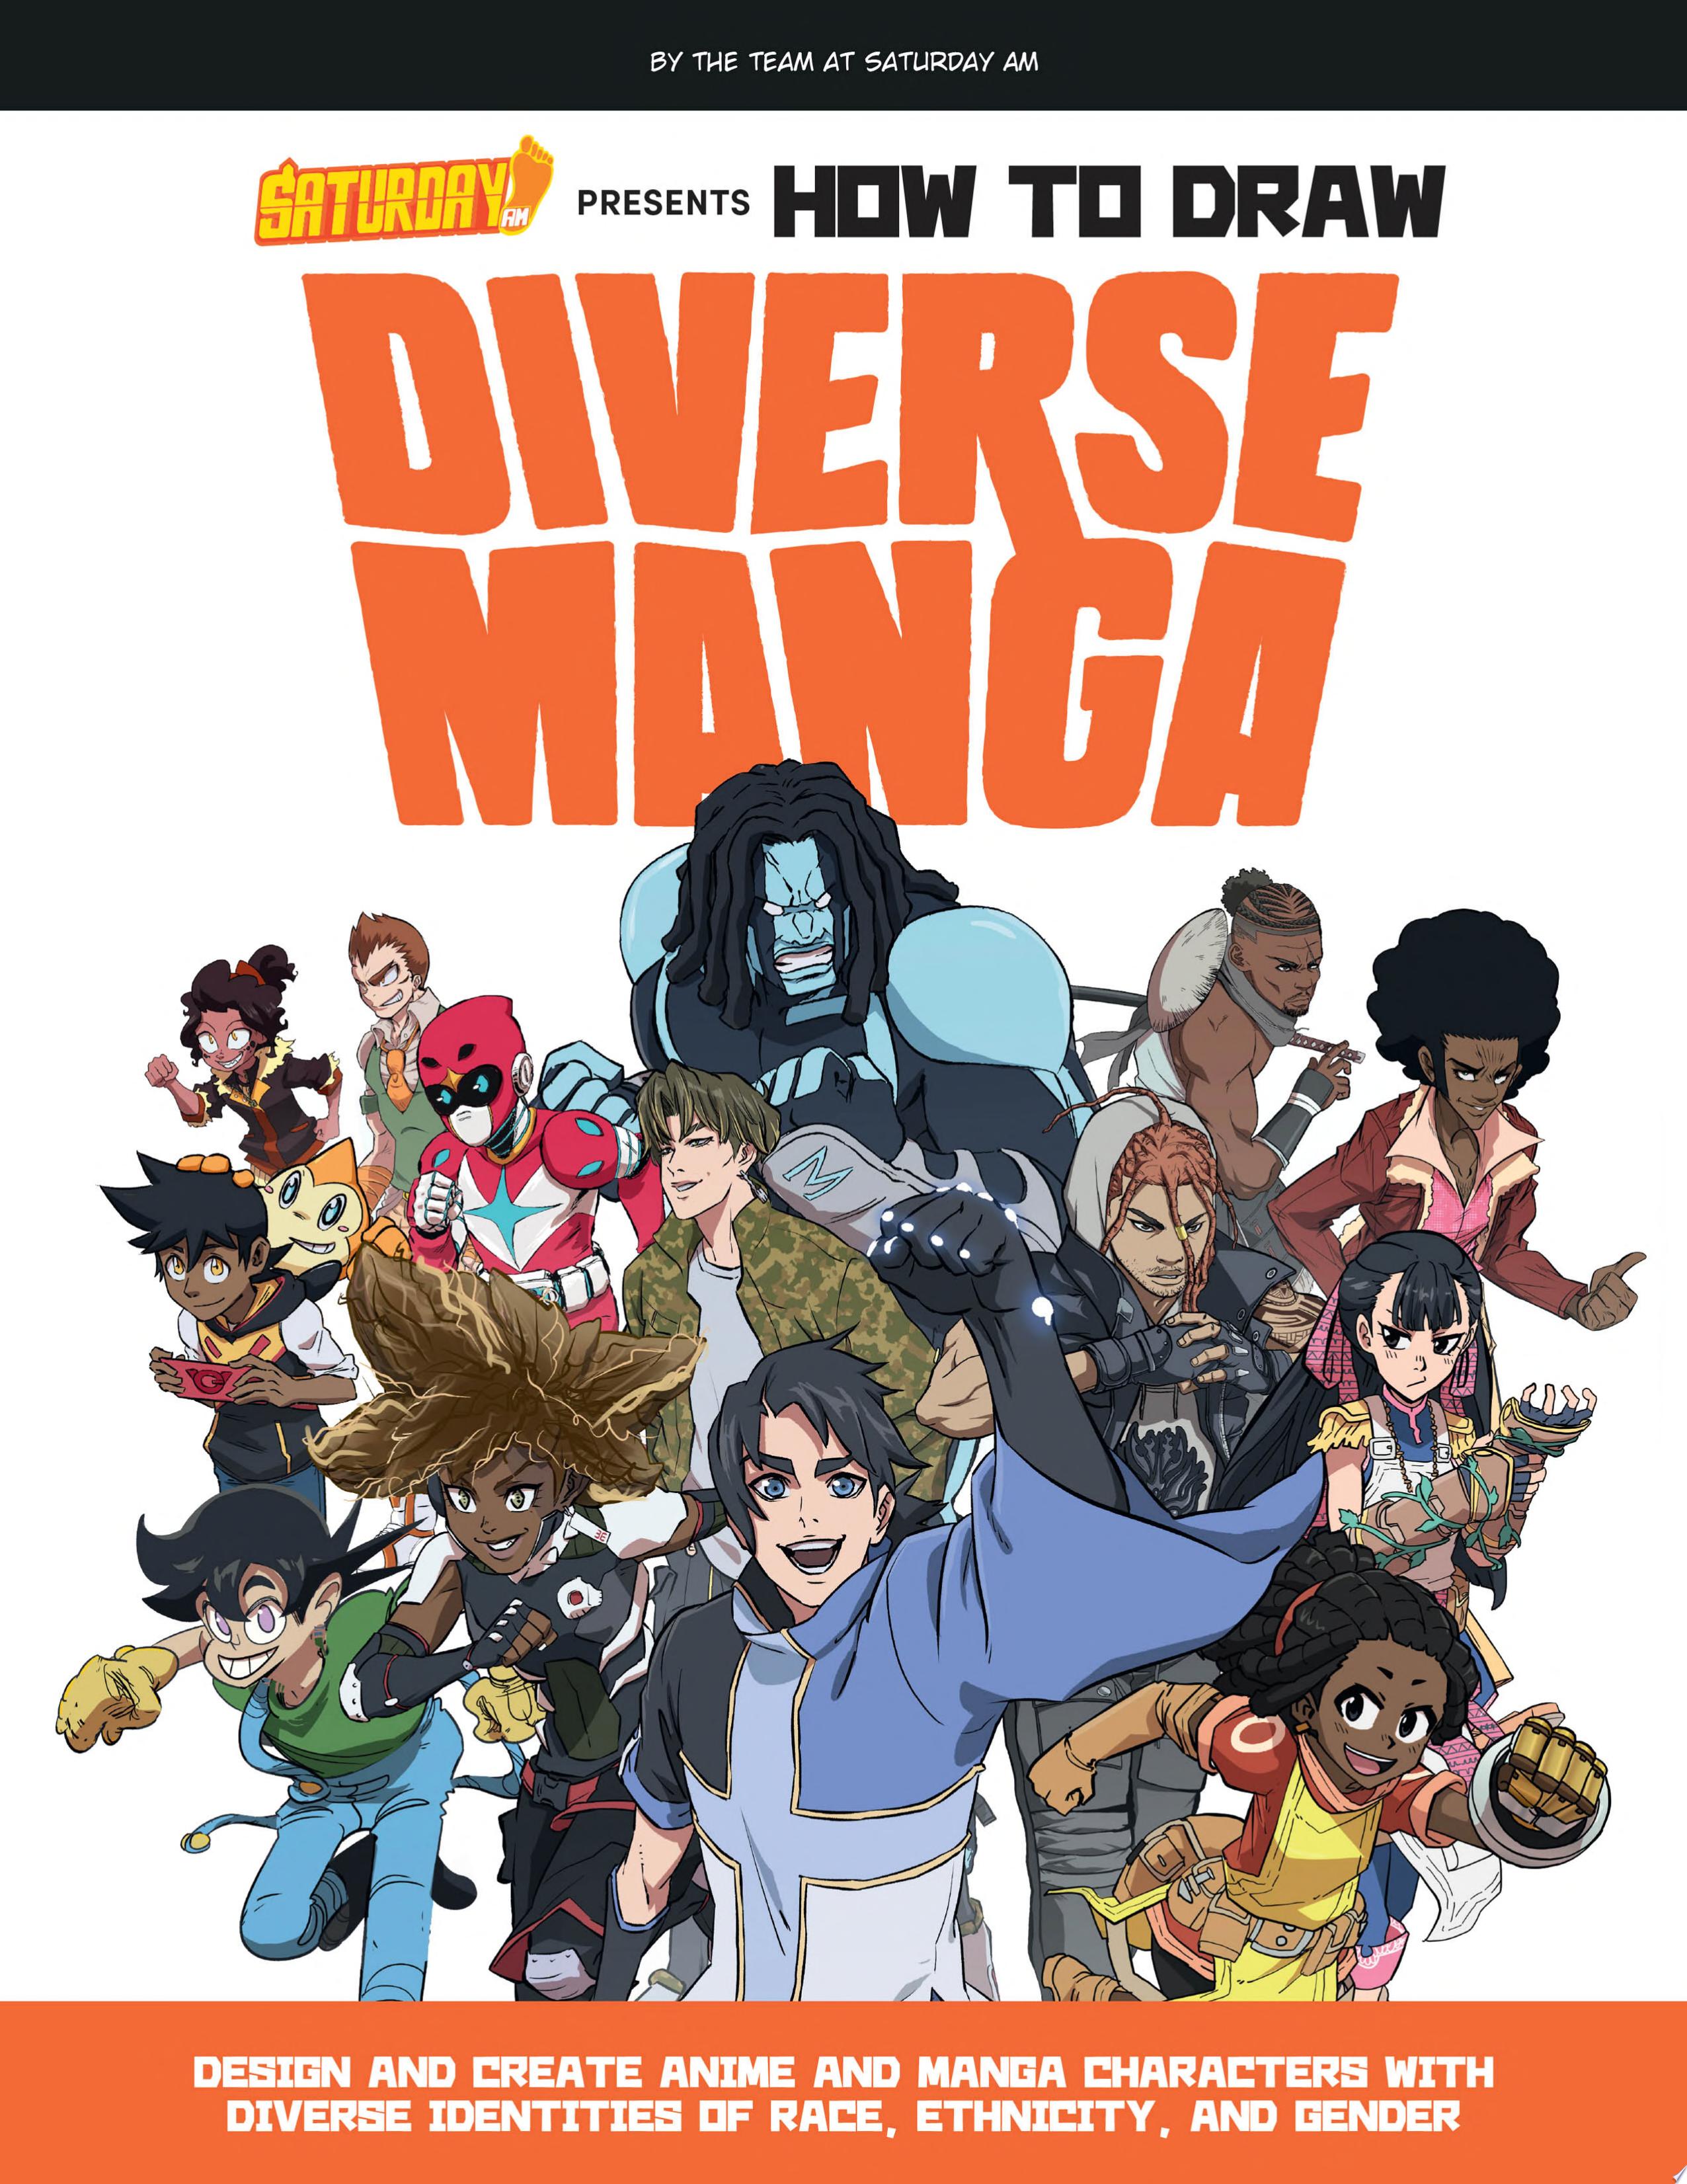 Image for "Saturday AM Presents How to Draw Diverse Manga"